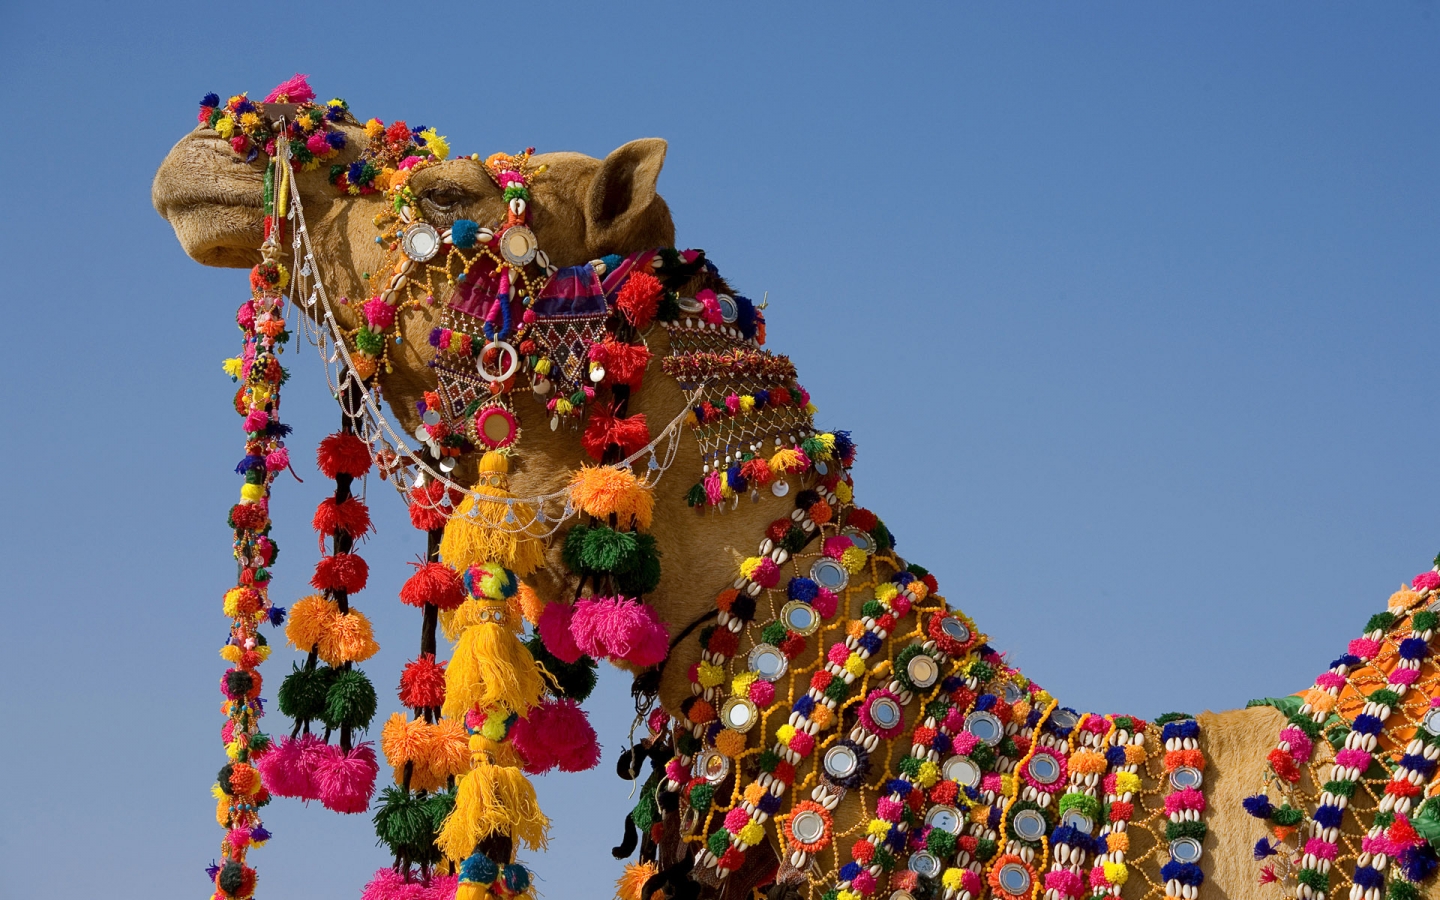 Decorated Camel for 1440 x 900 widescreen resolution